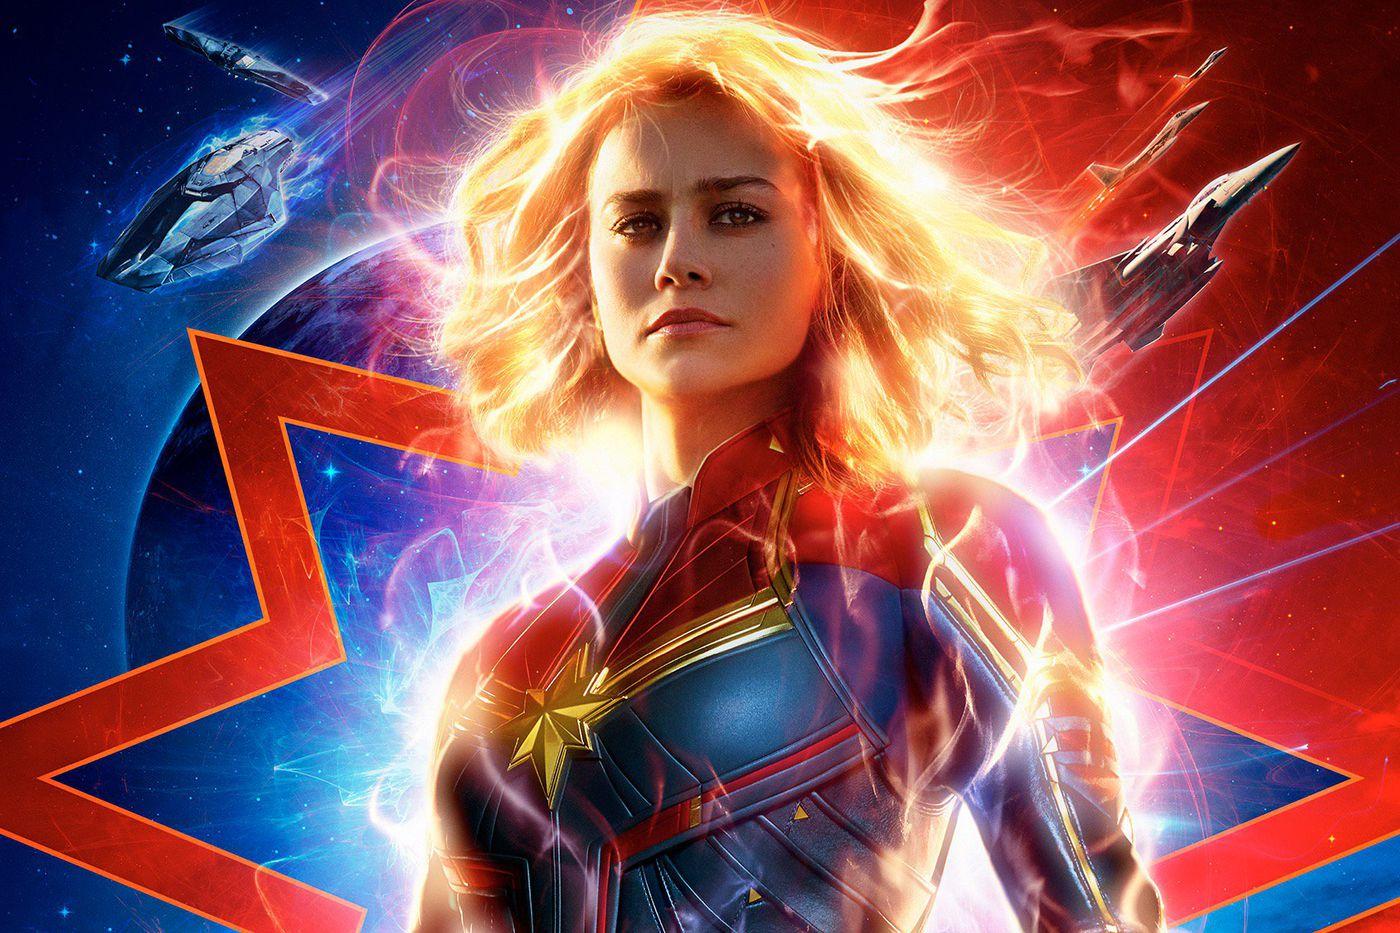 Captain Marvel's origin, powers, and comic history, explained